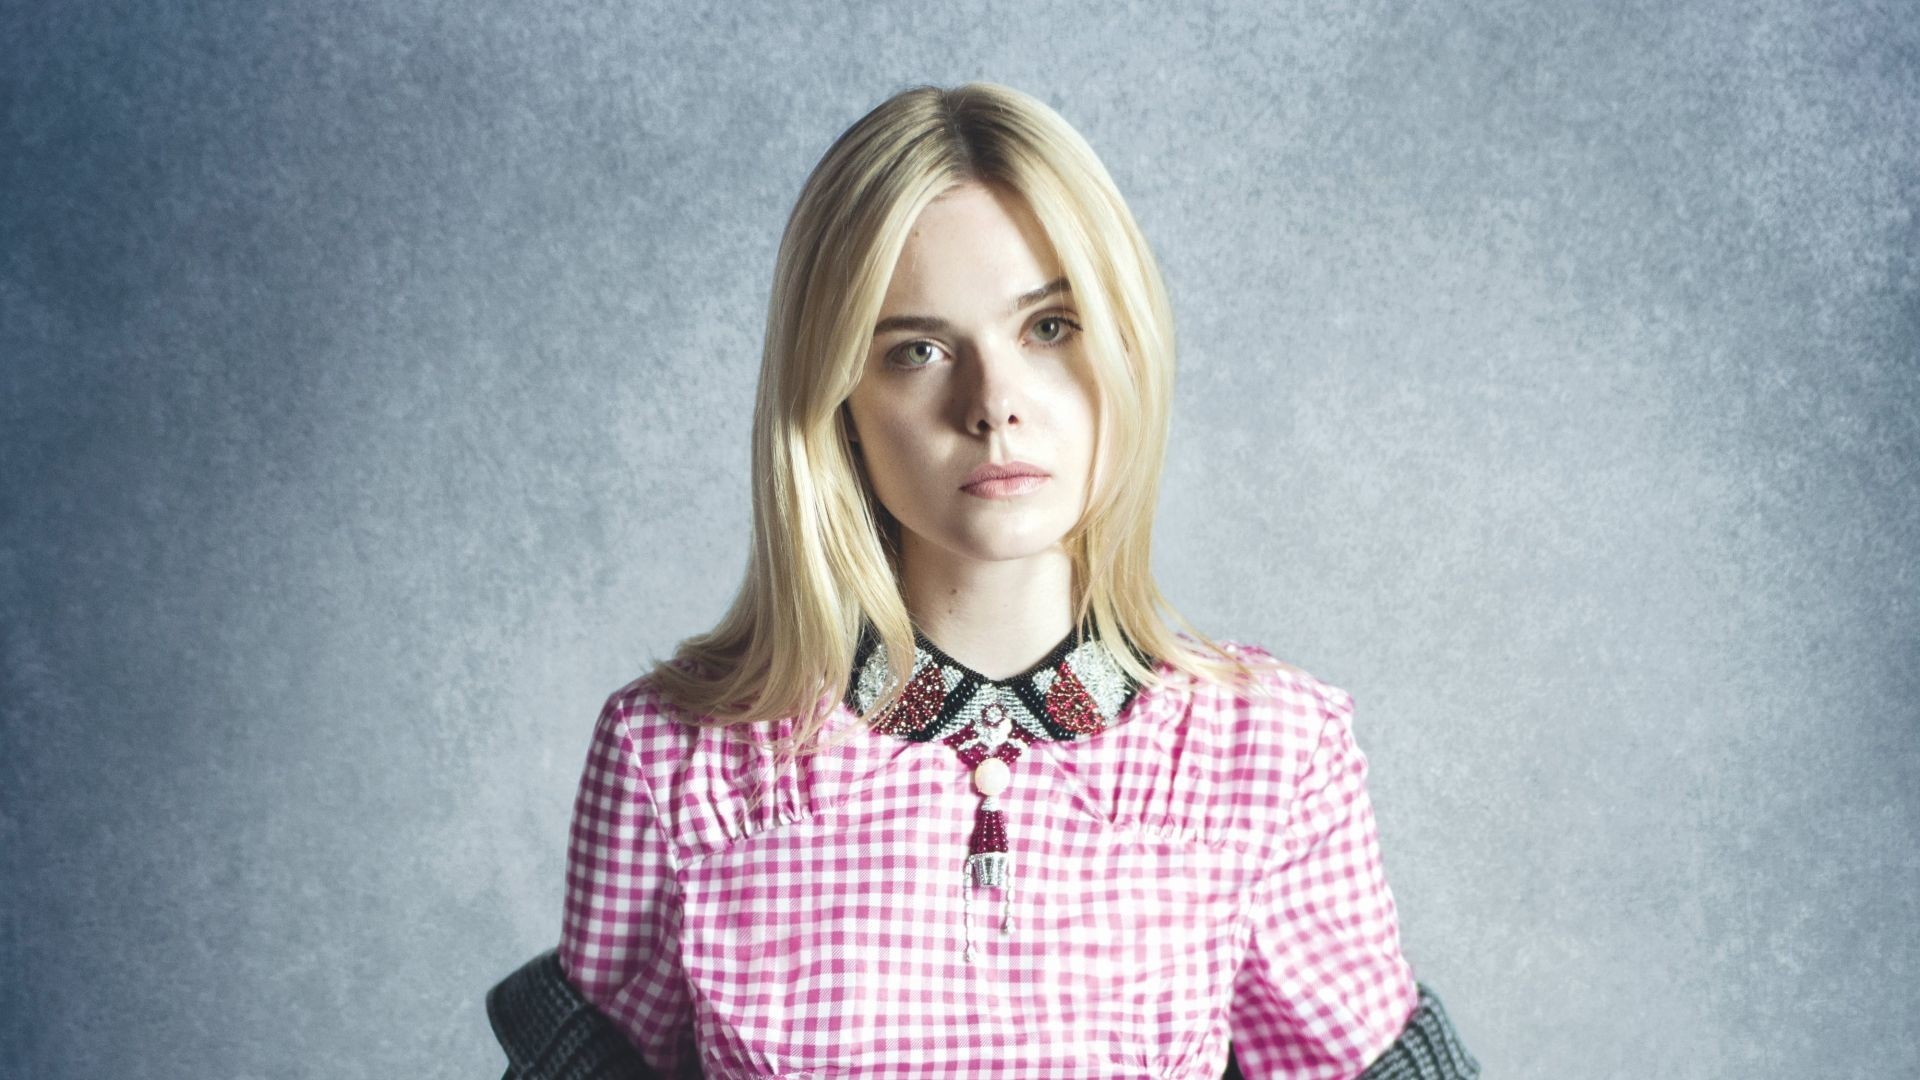 Elle Fanning: Starred in the 2022 Hulu miniseries The Girl from Plainville, playing Michelle Carter. 1920x1080 Full HD Background.